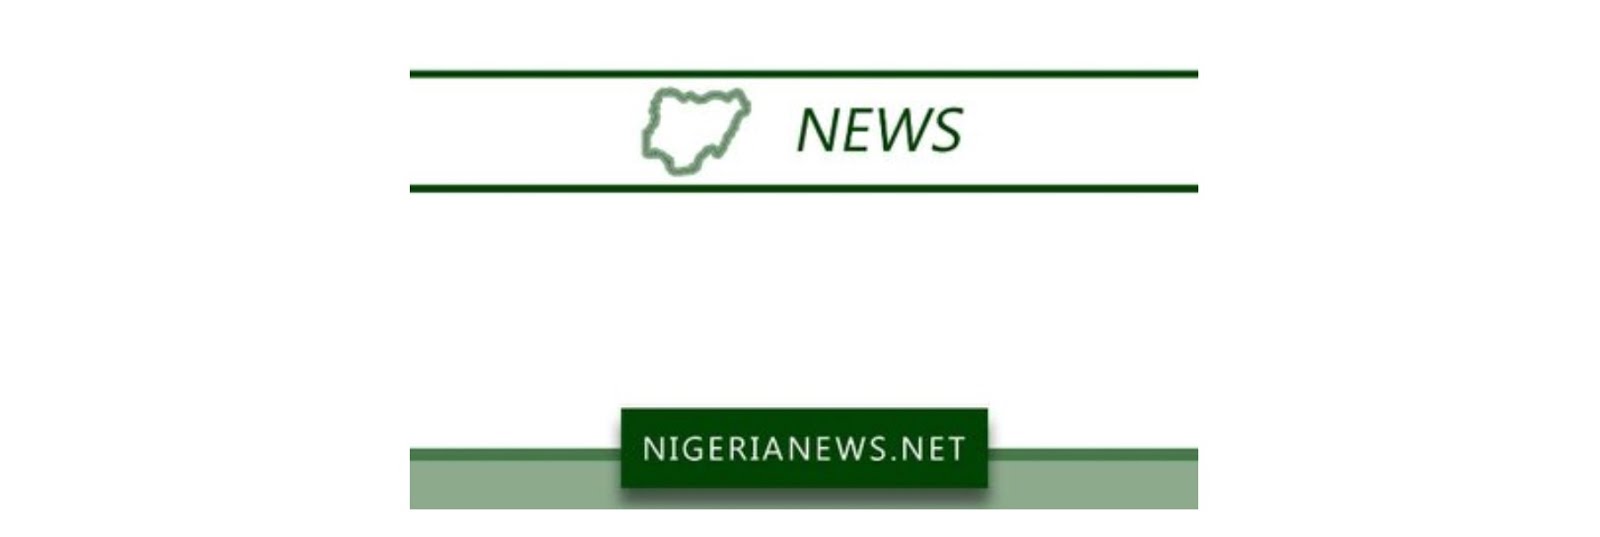 Nigeria News Blog for real-time news update